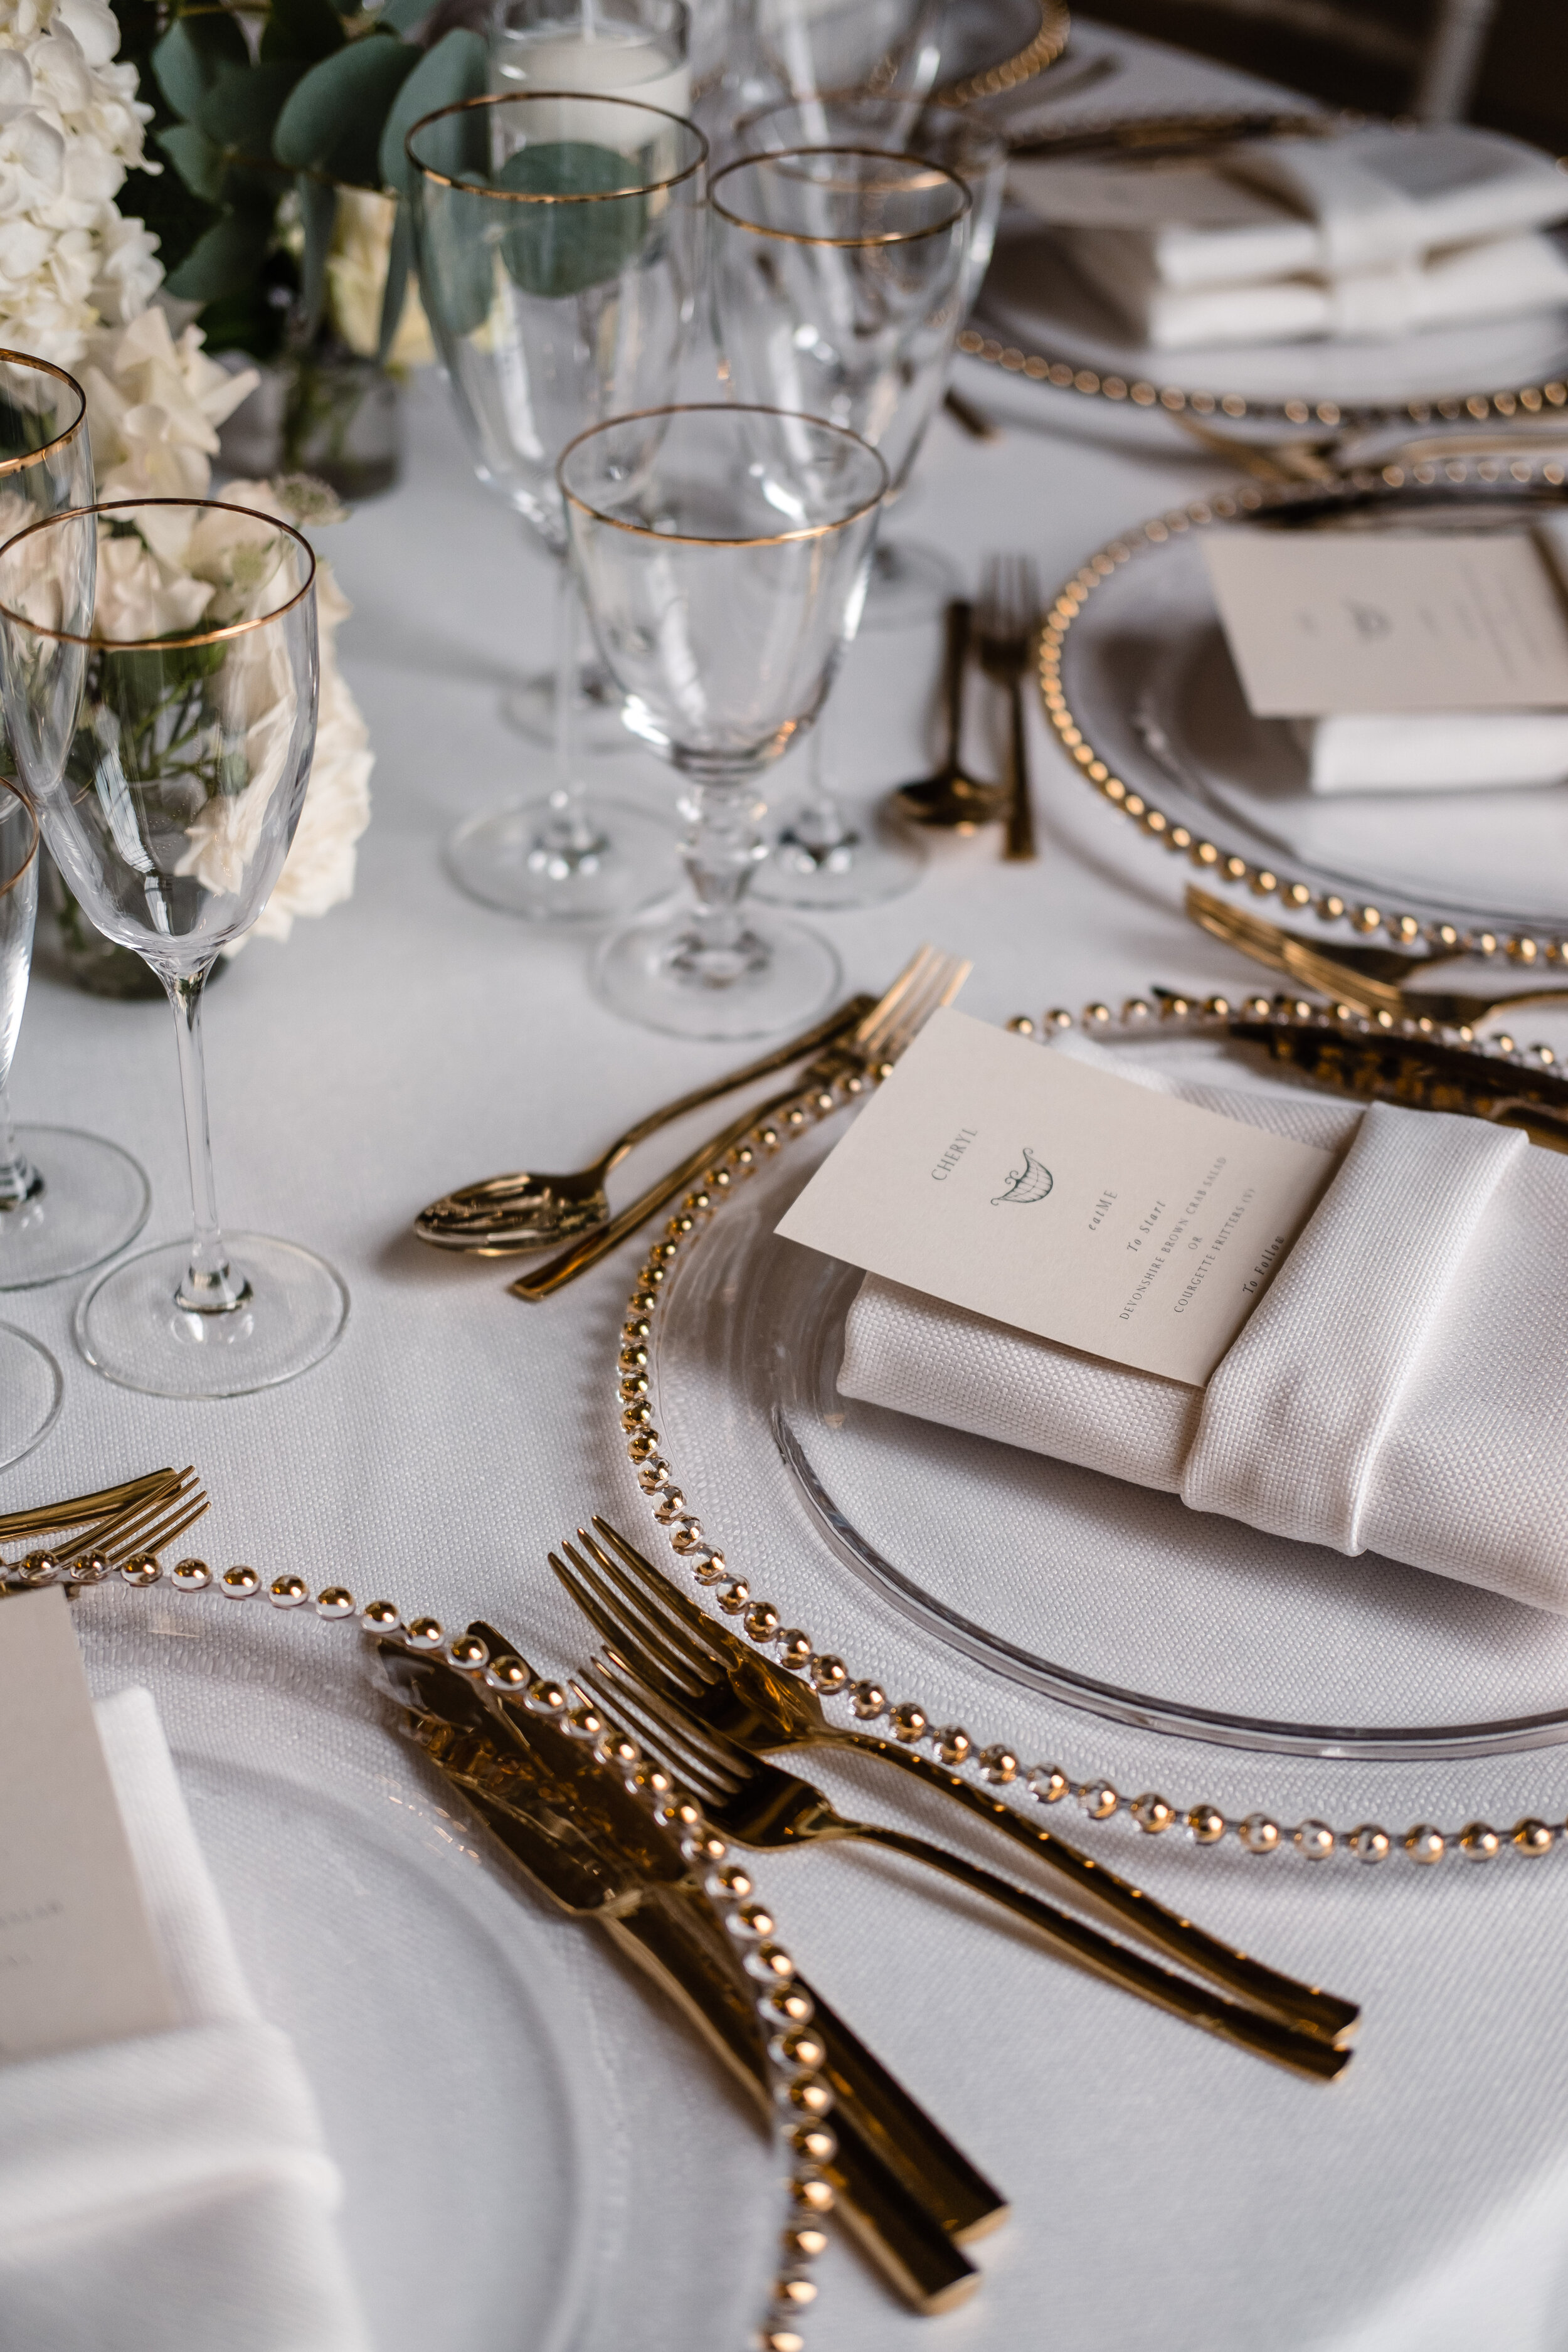 gold cutlery and dinnerware for wedding breakfast